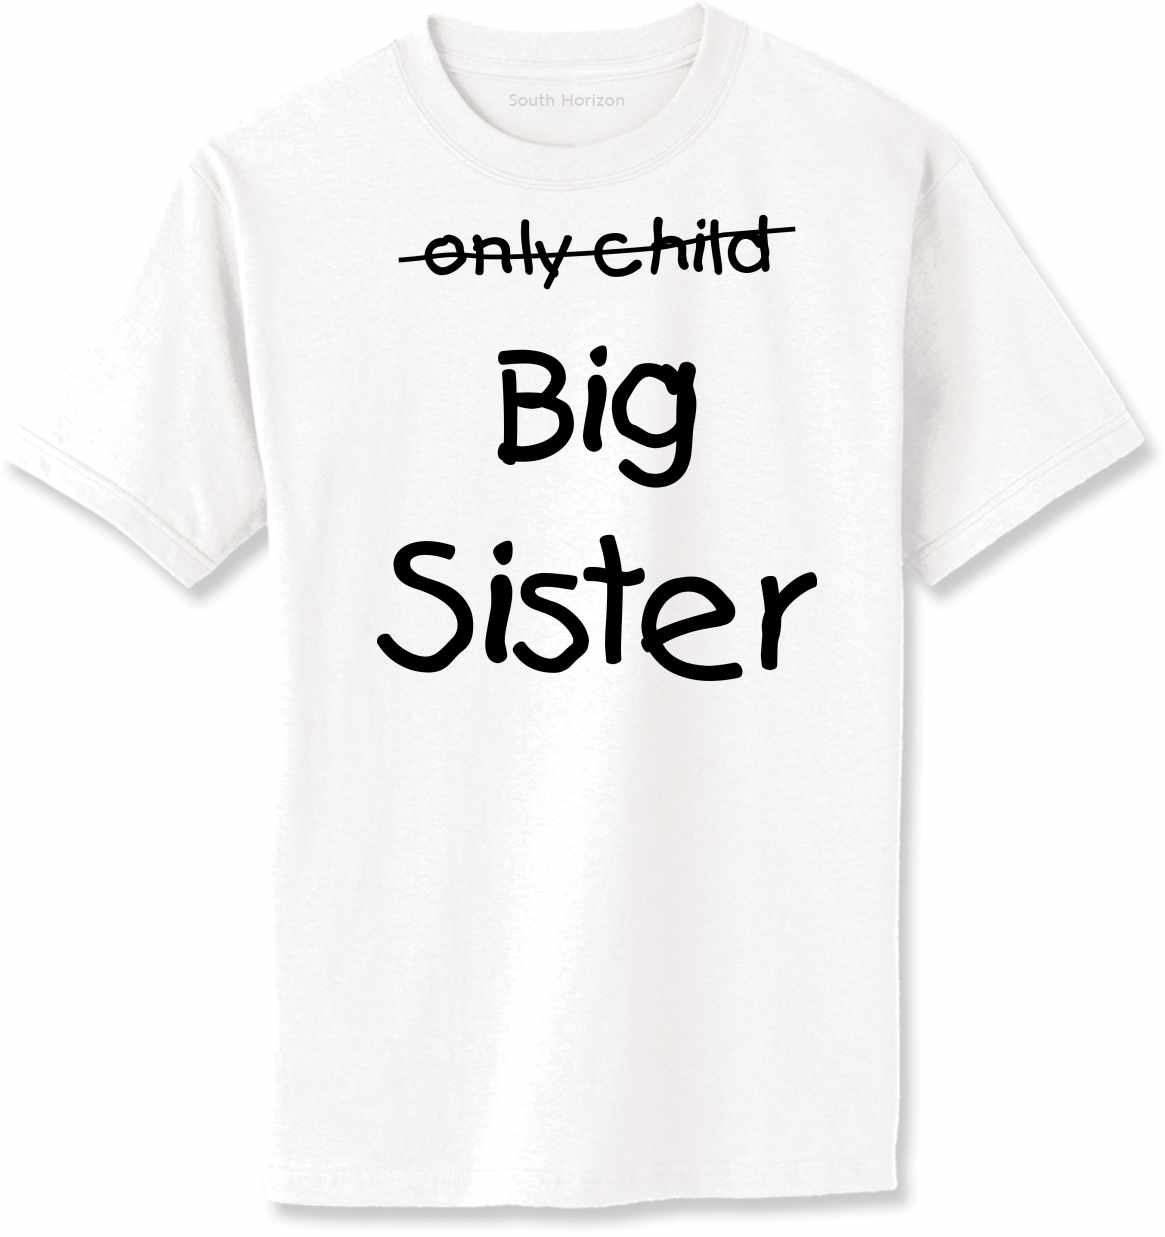 Only Child BIG SISTER on Adult T-Shirt (#968-1)